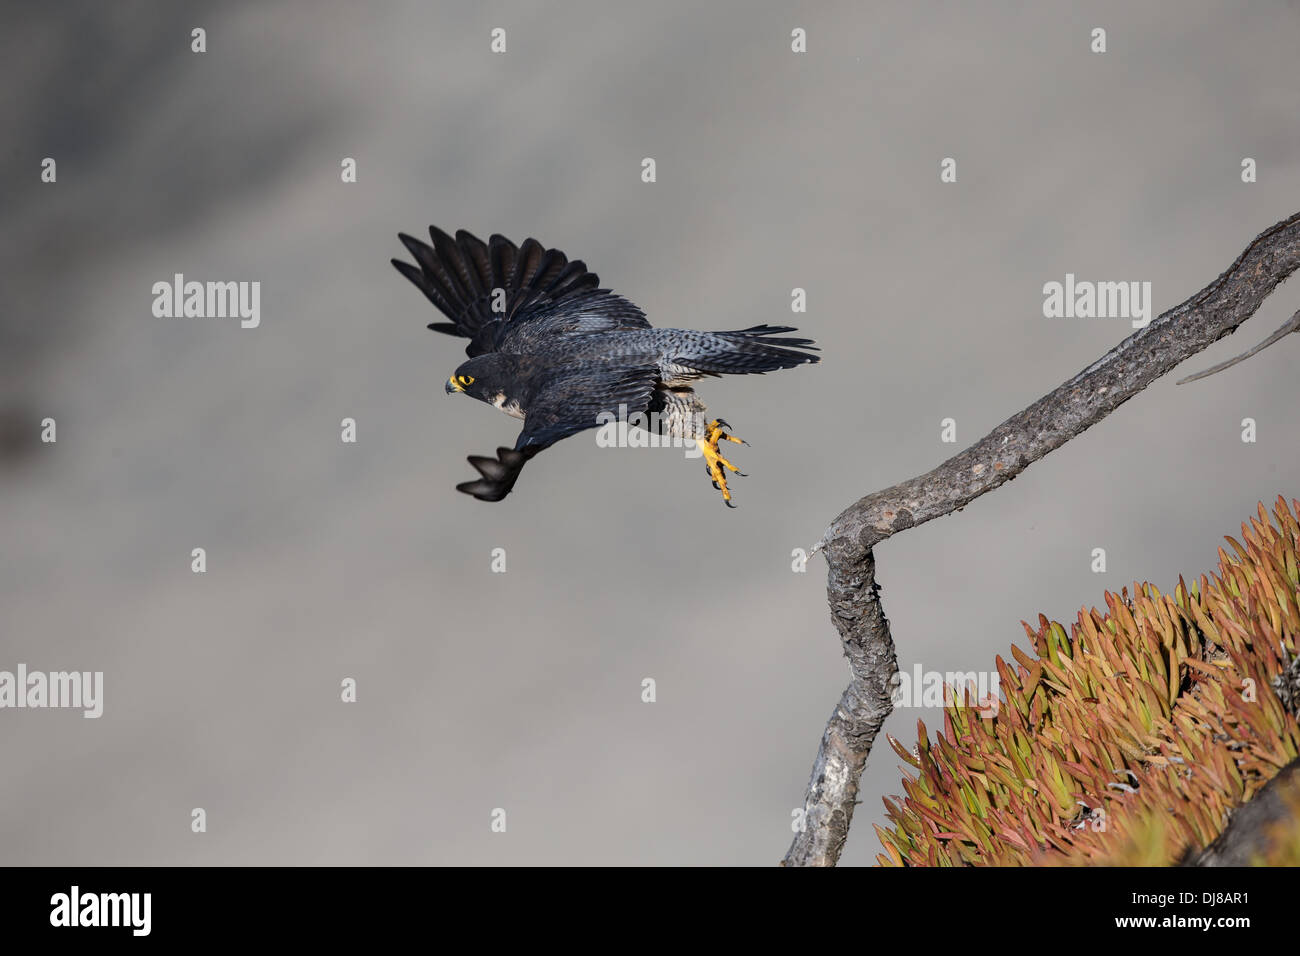 A peregrine falcon (Falco Peregrinus) above the sand at Torrey Pines State Beach in San Diego, California. Stock Photo